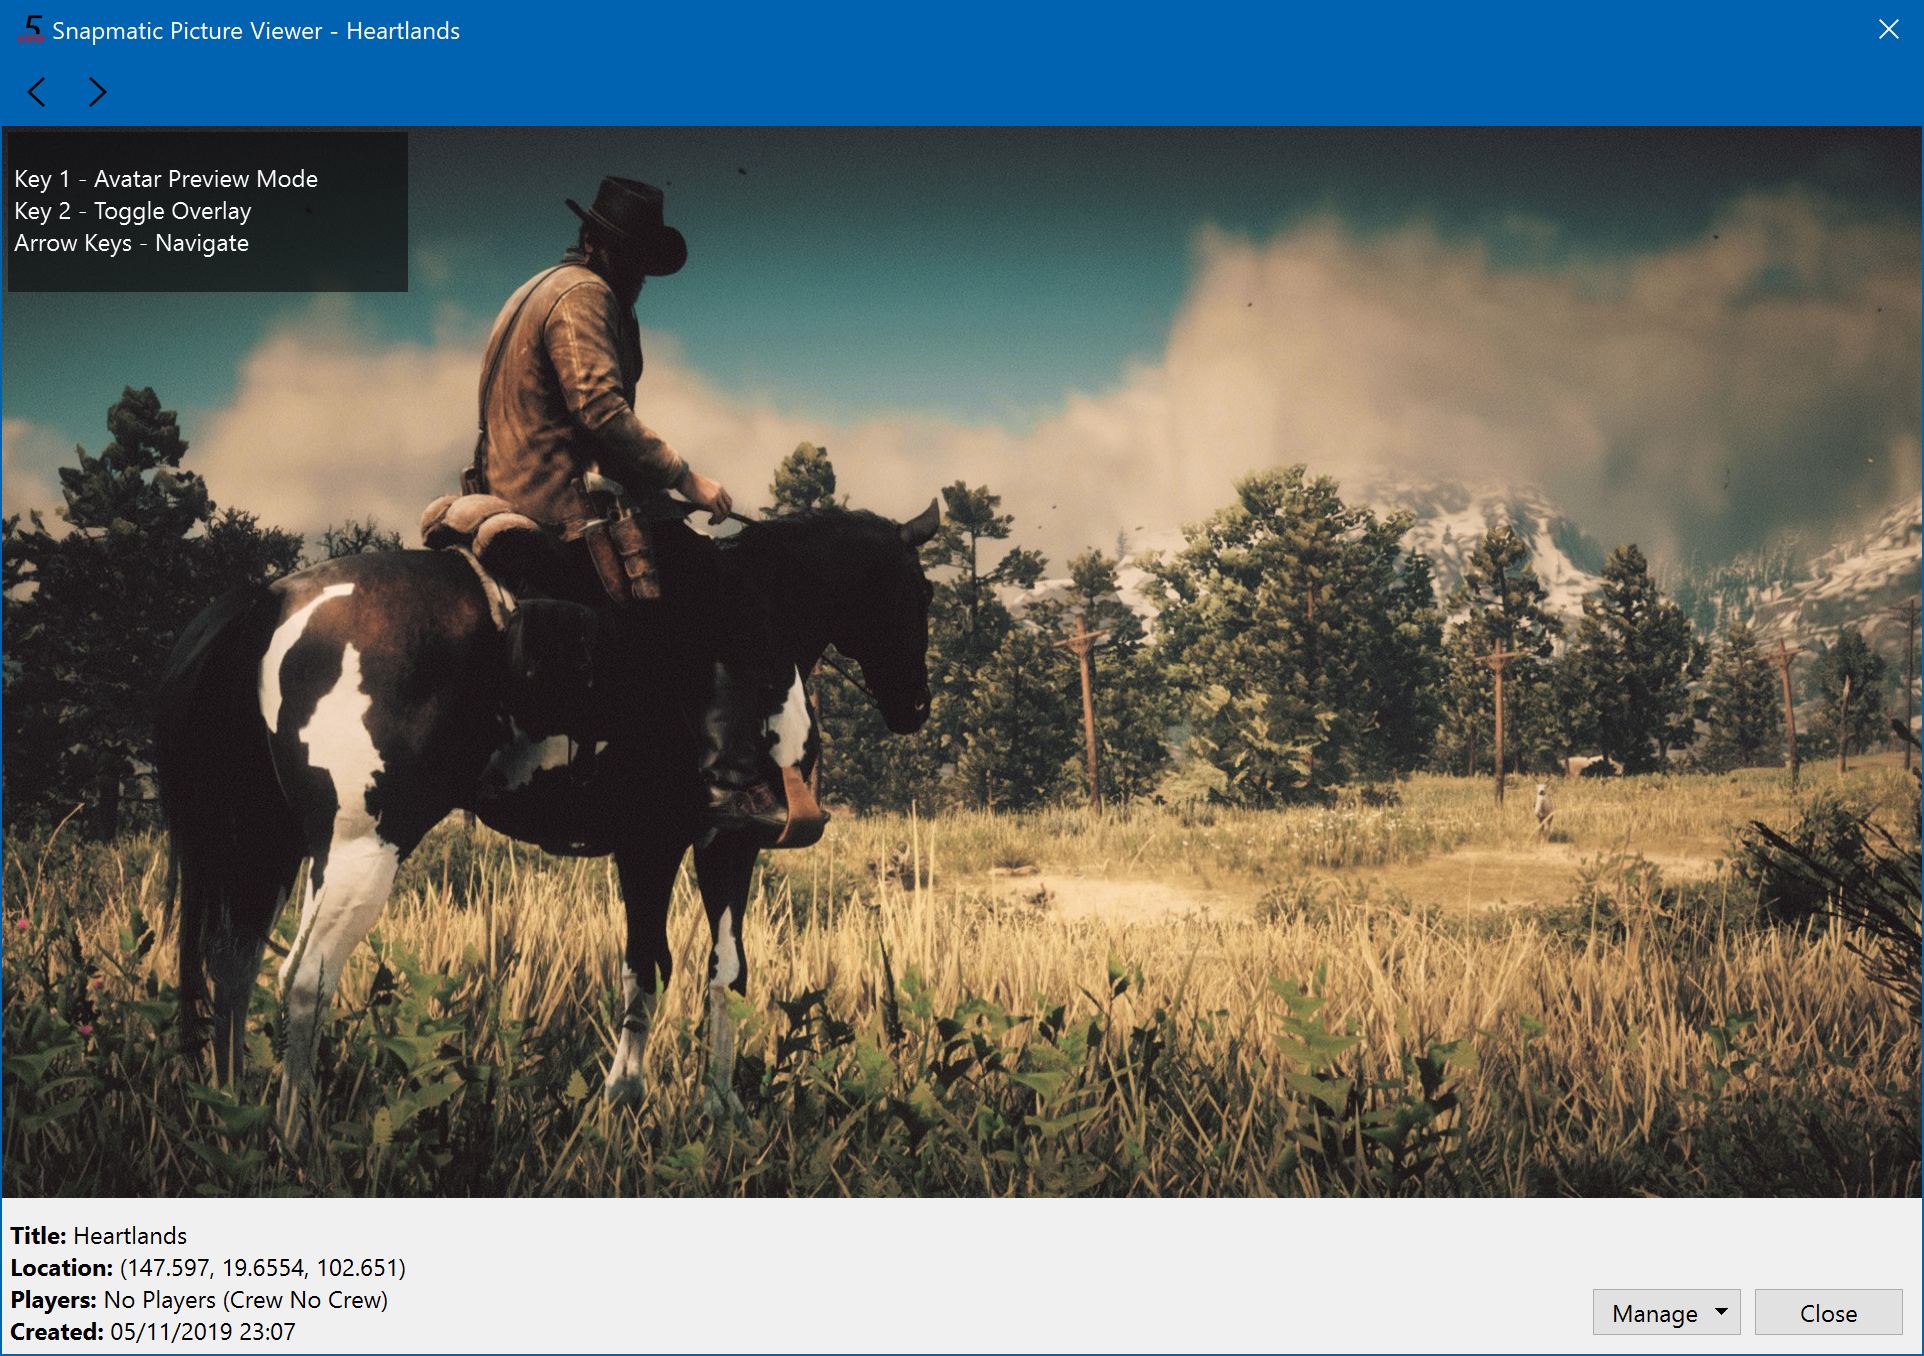 Red dead redemption 2 природа. Red Dead Redemption 2. Red Dead Redemption 2 Скриншоты. Red Dead Redemption 2 rdr2 screenshots. Ред дед редемпшен 2 природа.